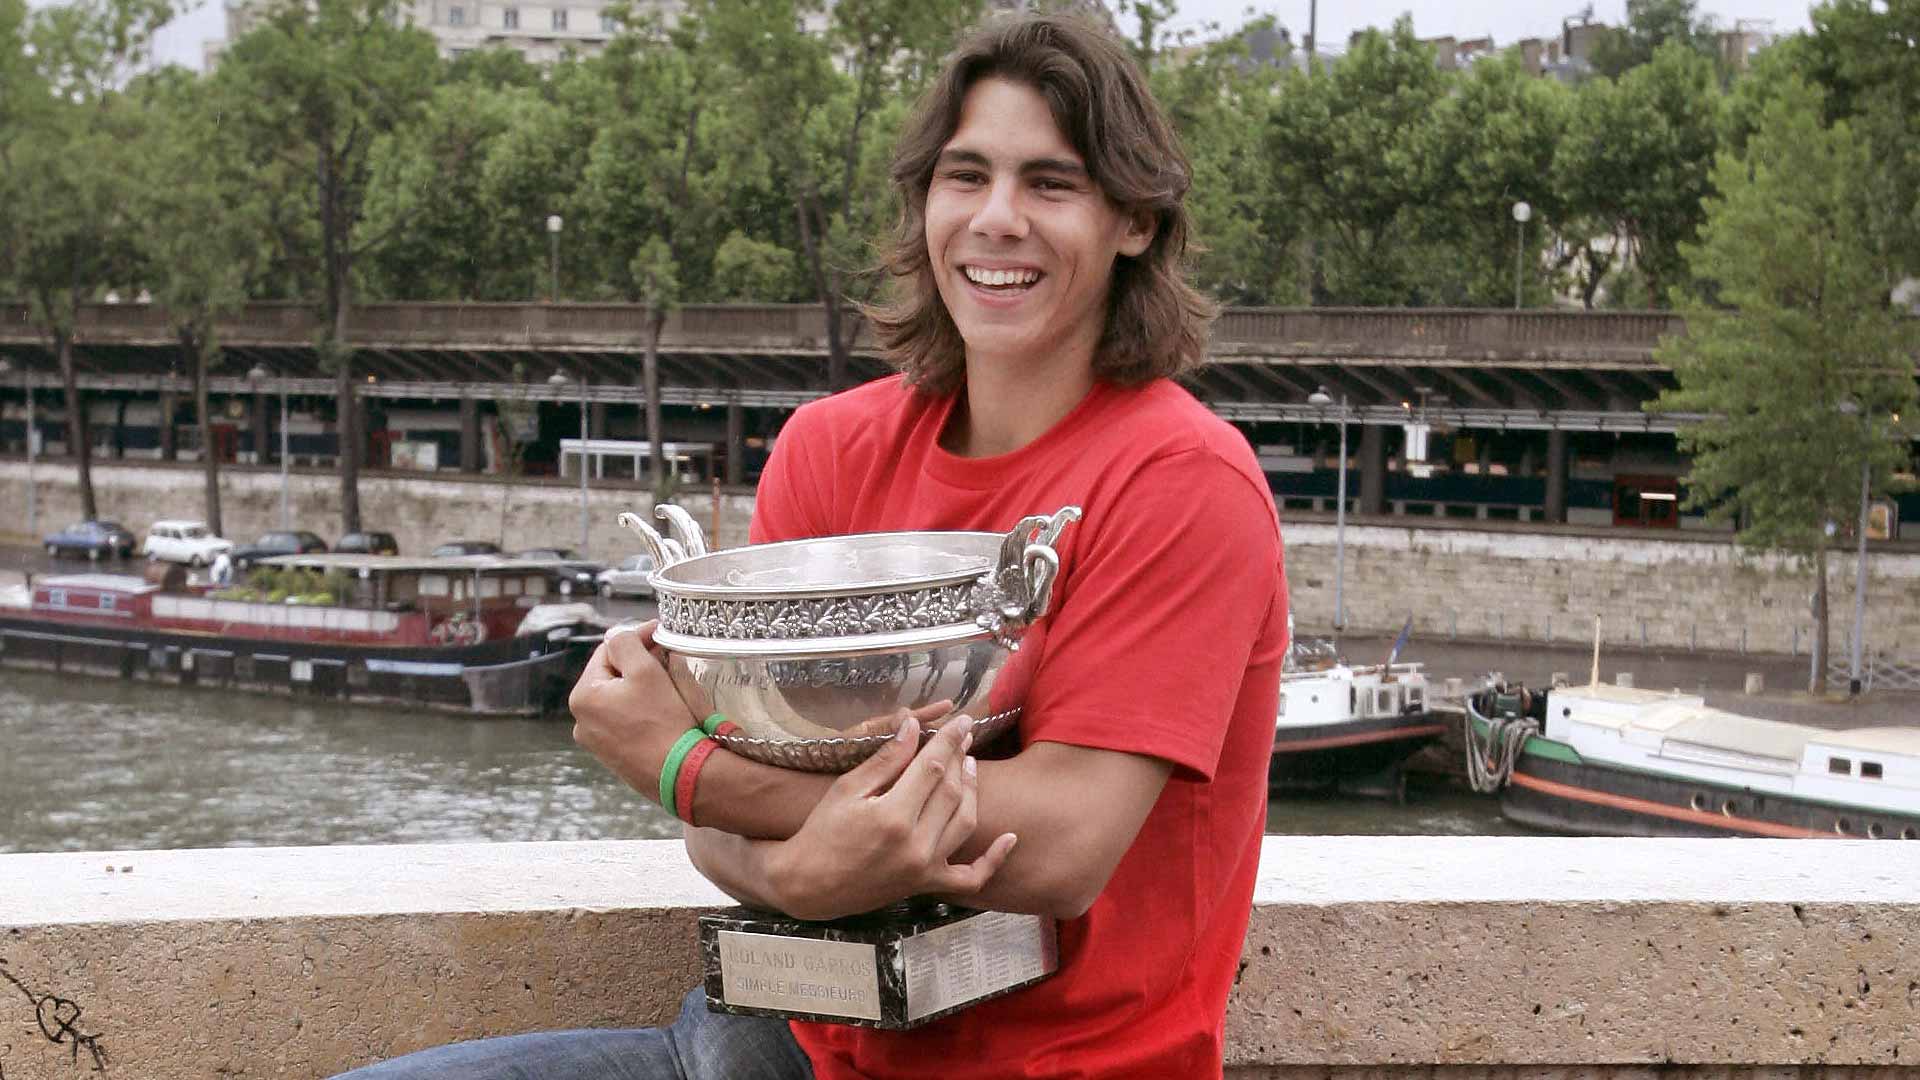 In 2005, Rafael Nadal won his first Roland Garros trophy at the age of 19